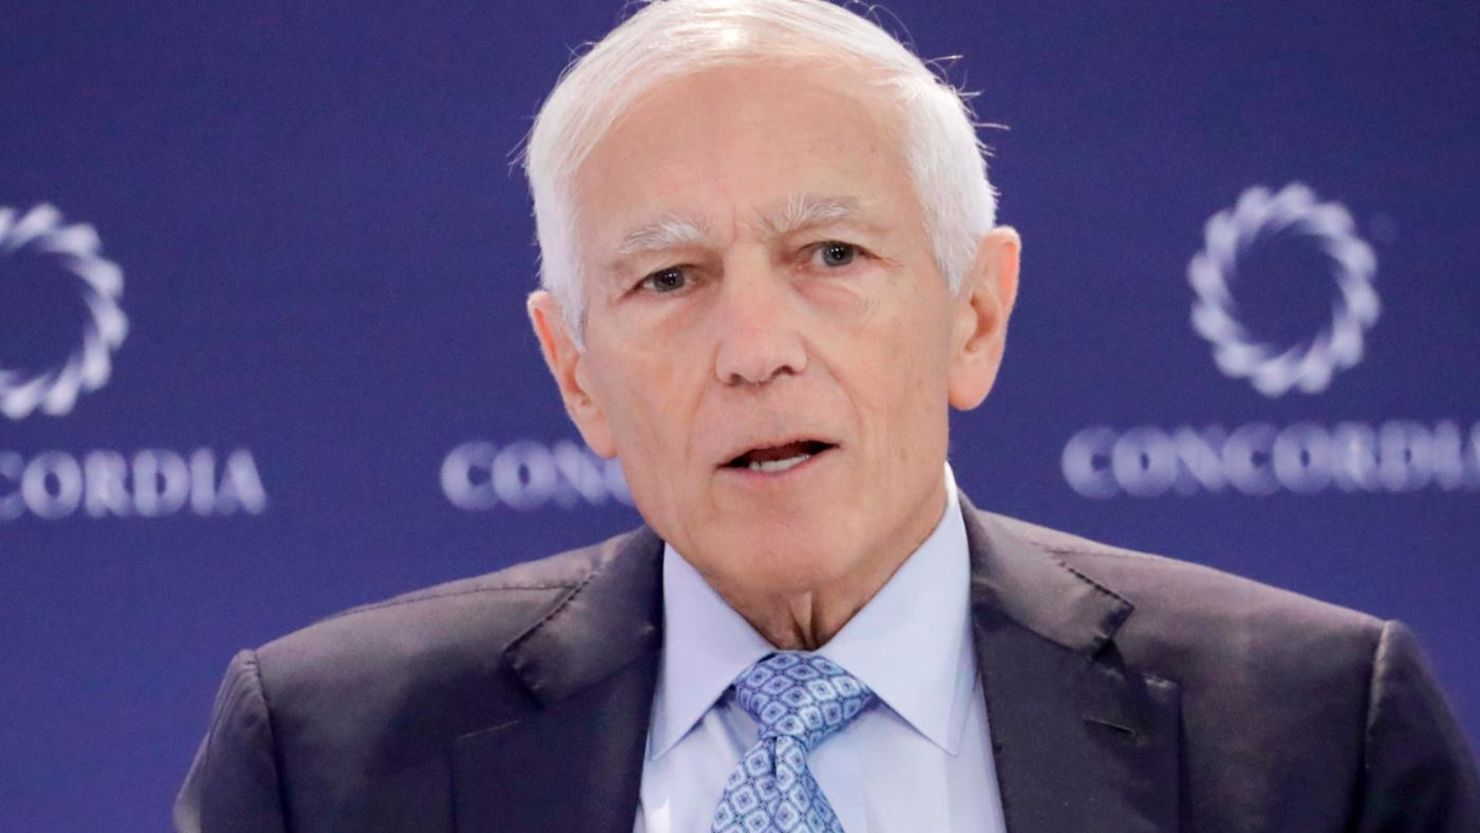 General Wesley Clark of Renew America Together speaks on stage during The 2022 Concordia Annual Summit - Day 1 at Sheraton New York on September 19, 2022, in New York City.